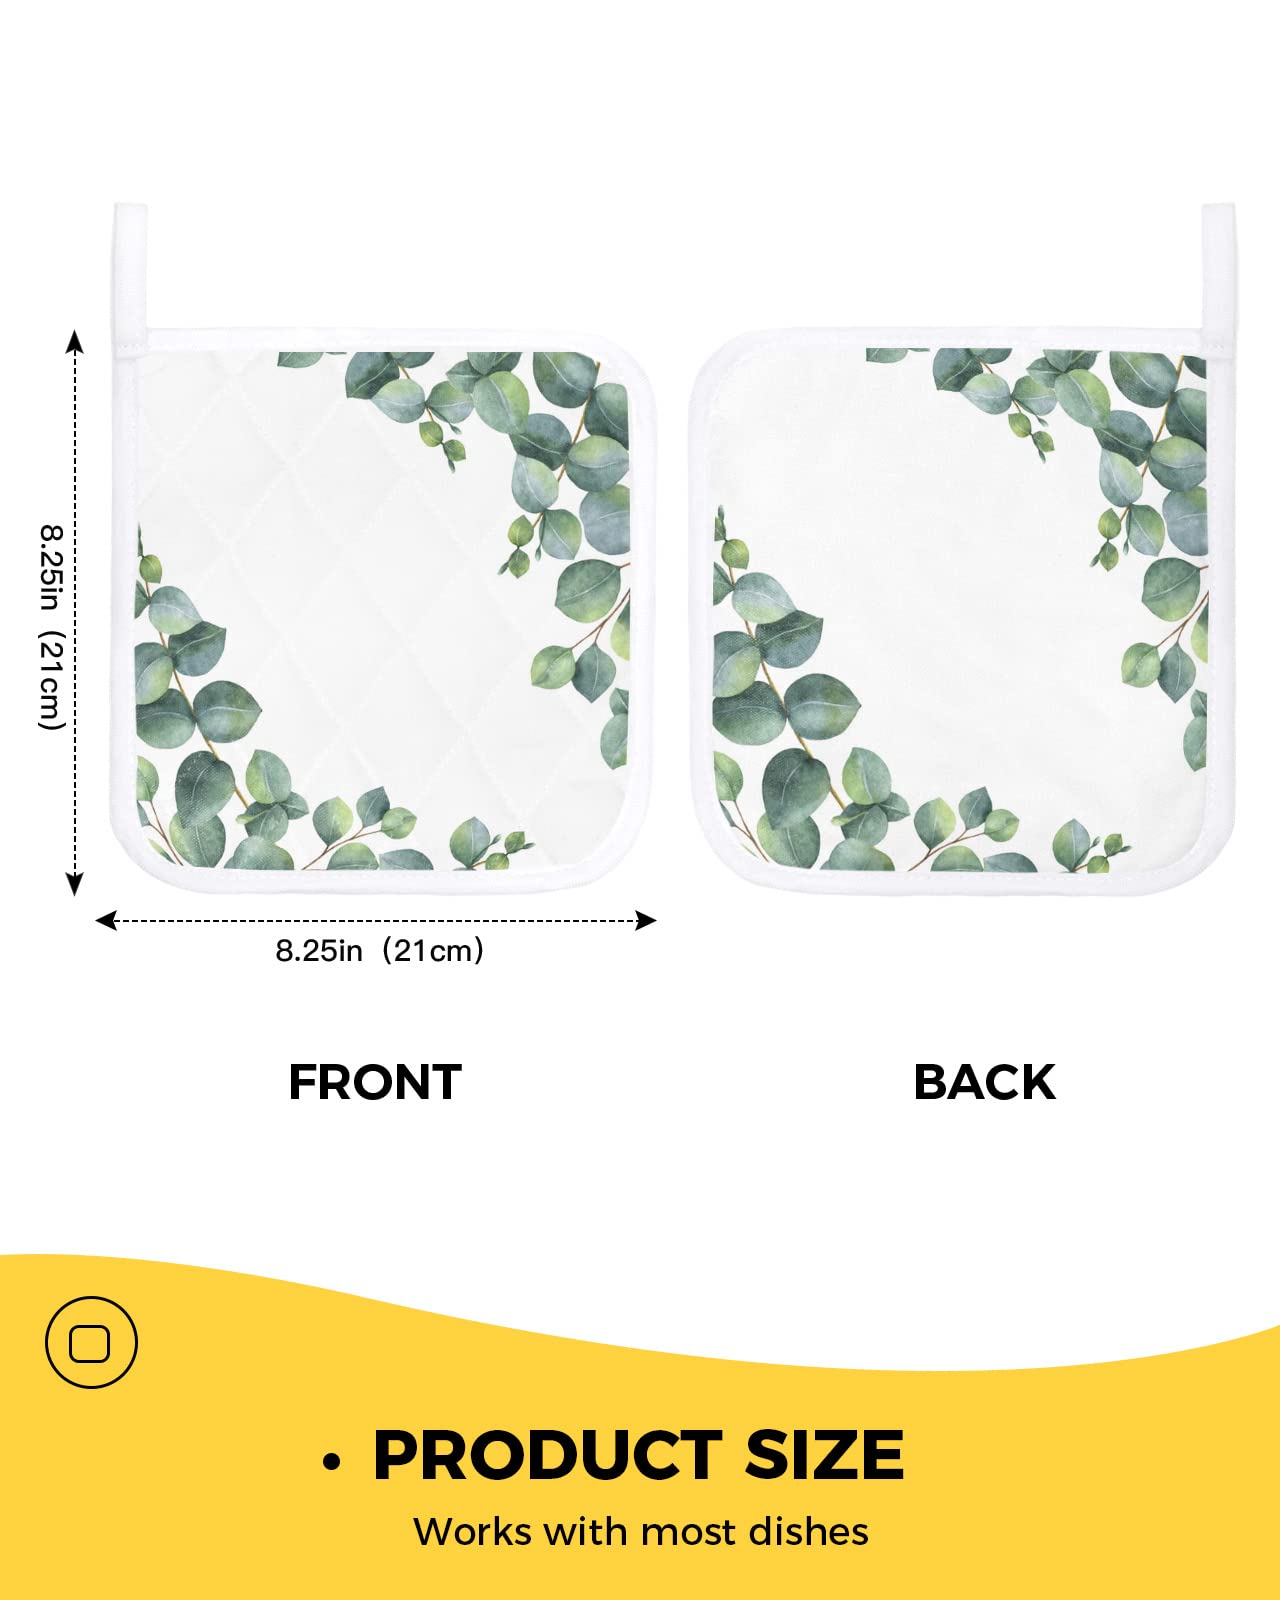 2Pack Pot Holders Cotton Heat Resistant Oven Hot Pads, Plant Potholder Machine Washable Cloth Potholders for Daily Kitchen Baking and Cooking with Hanging Loops - Green Fresh Eucalyptus Leaves